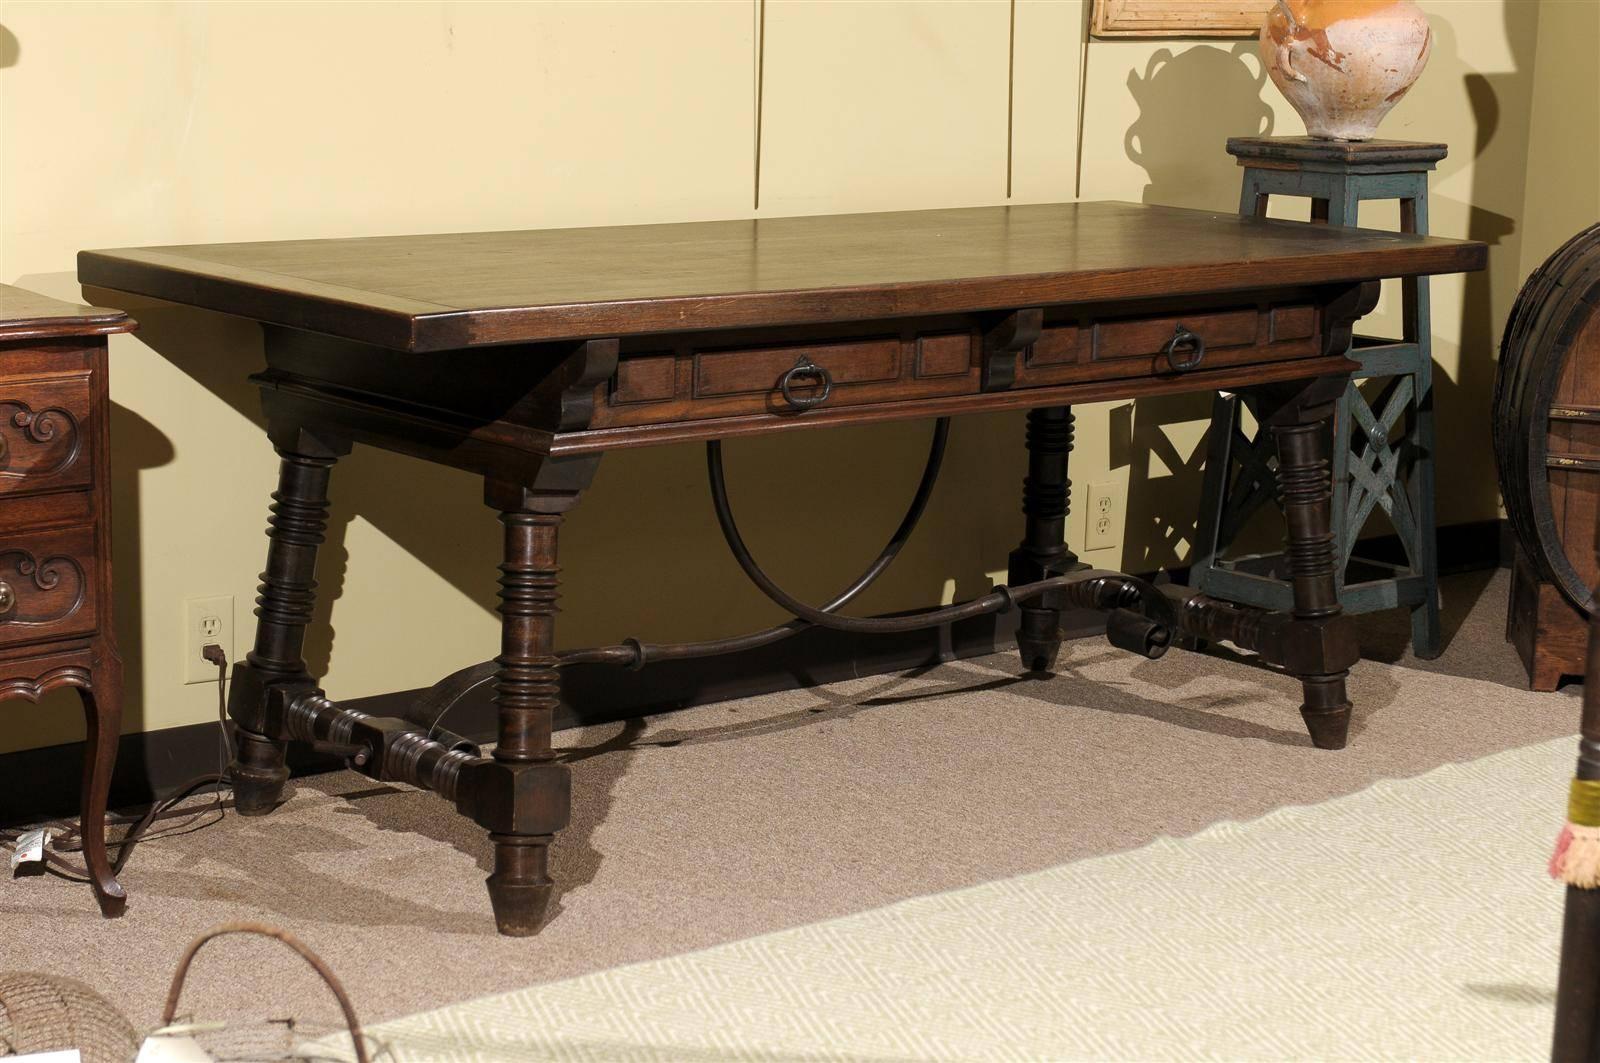 This is a versatile table. If you have the room, it doesn't need to be used as a desk. The design, with it's carved legs and iron stretcher, makes quite a statement.